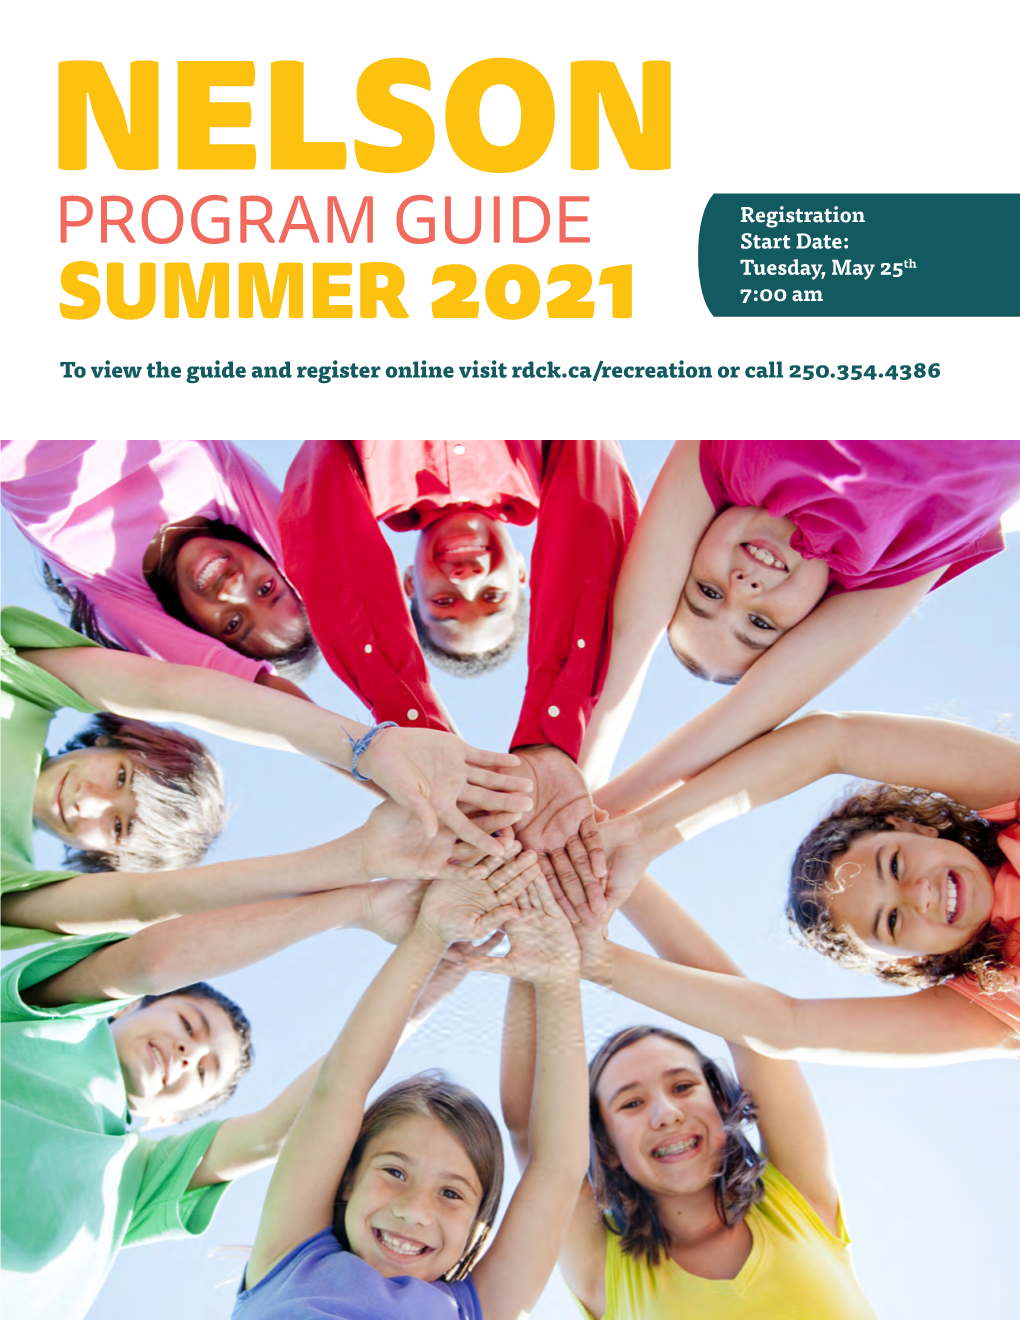 PROGRAM GUIDE Start Date: Tuesday, May 25Th SUMMER 2021 7:00 Am to View the Guide and Register Online Visit Rdck.Ca/Recreation Or Call 250.354.4386